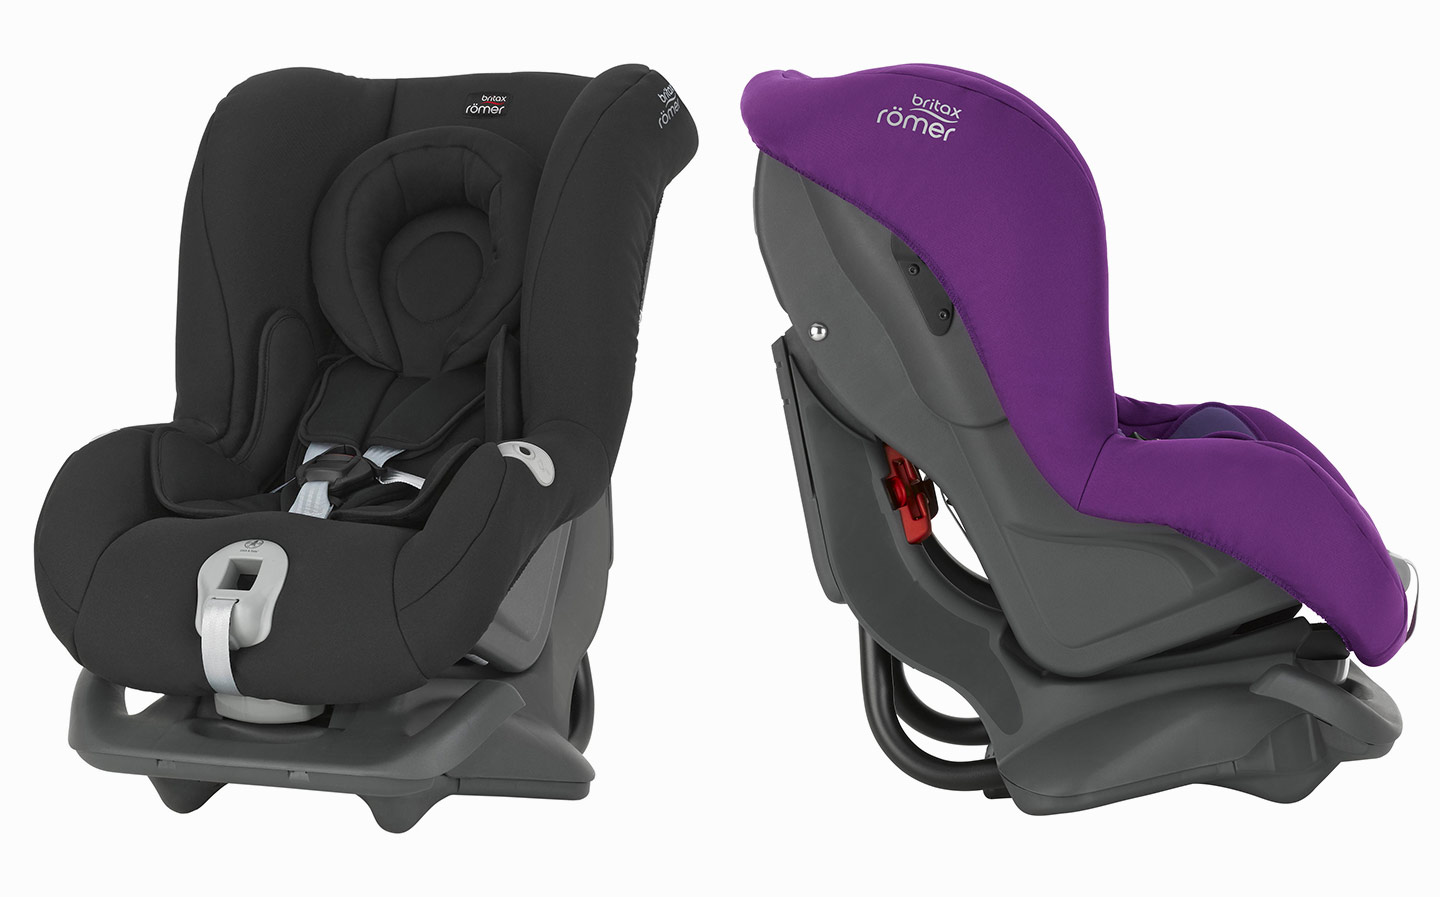 Britax First Class Plus Child Car Seat review